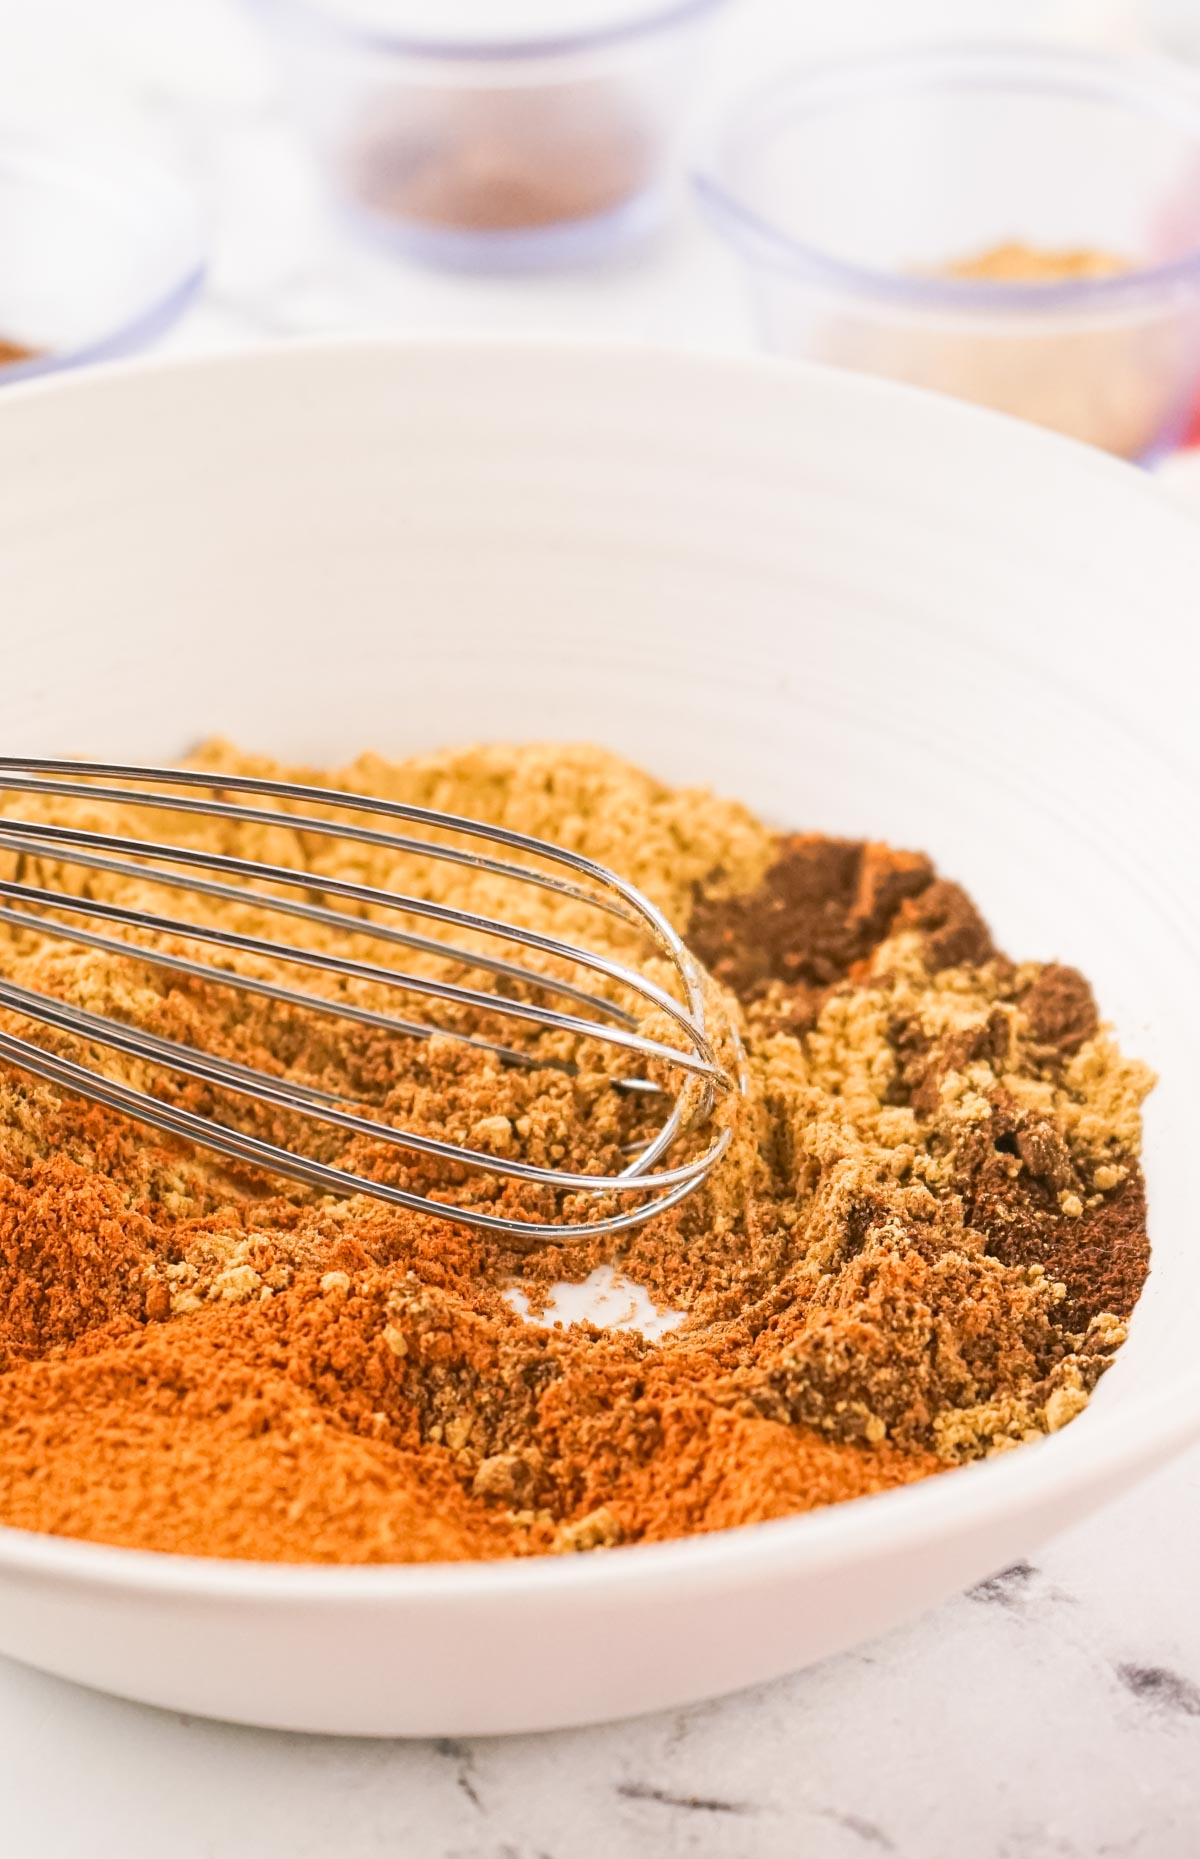 A whisk combing the spices into a mix.